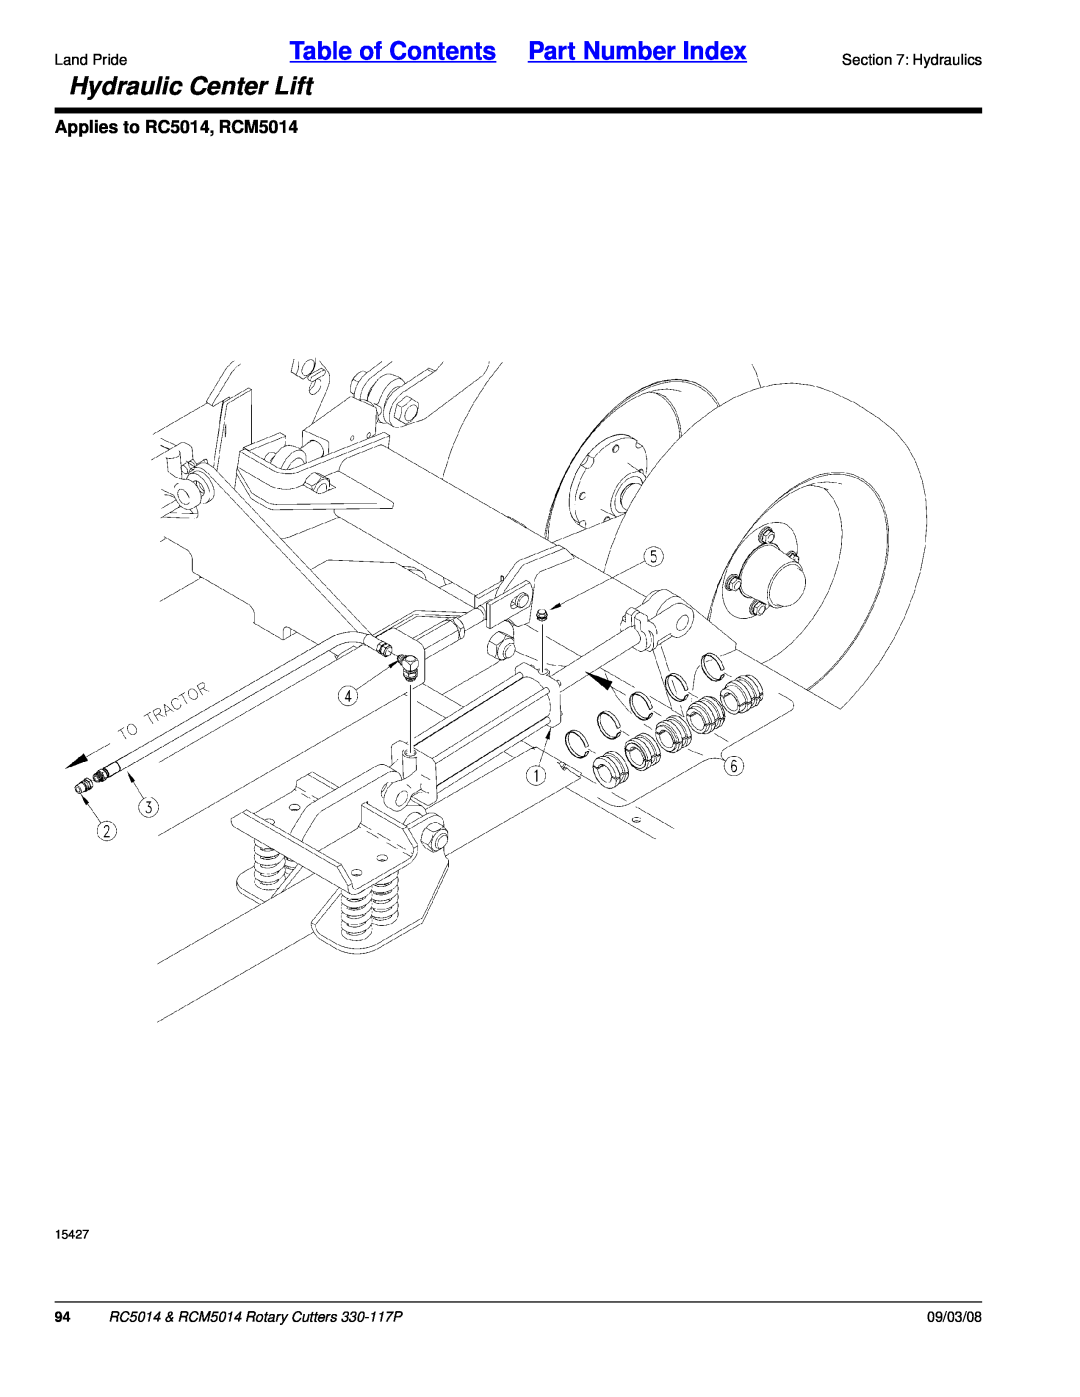 Land Pride manual Hydraulic Center Lift, Table of Contents Part Number Index, Applies to RC5014, RCM5014, 09/03/08 